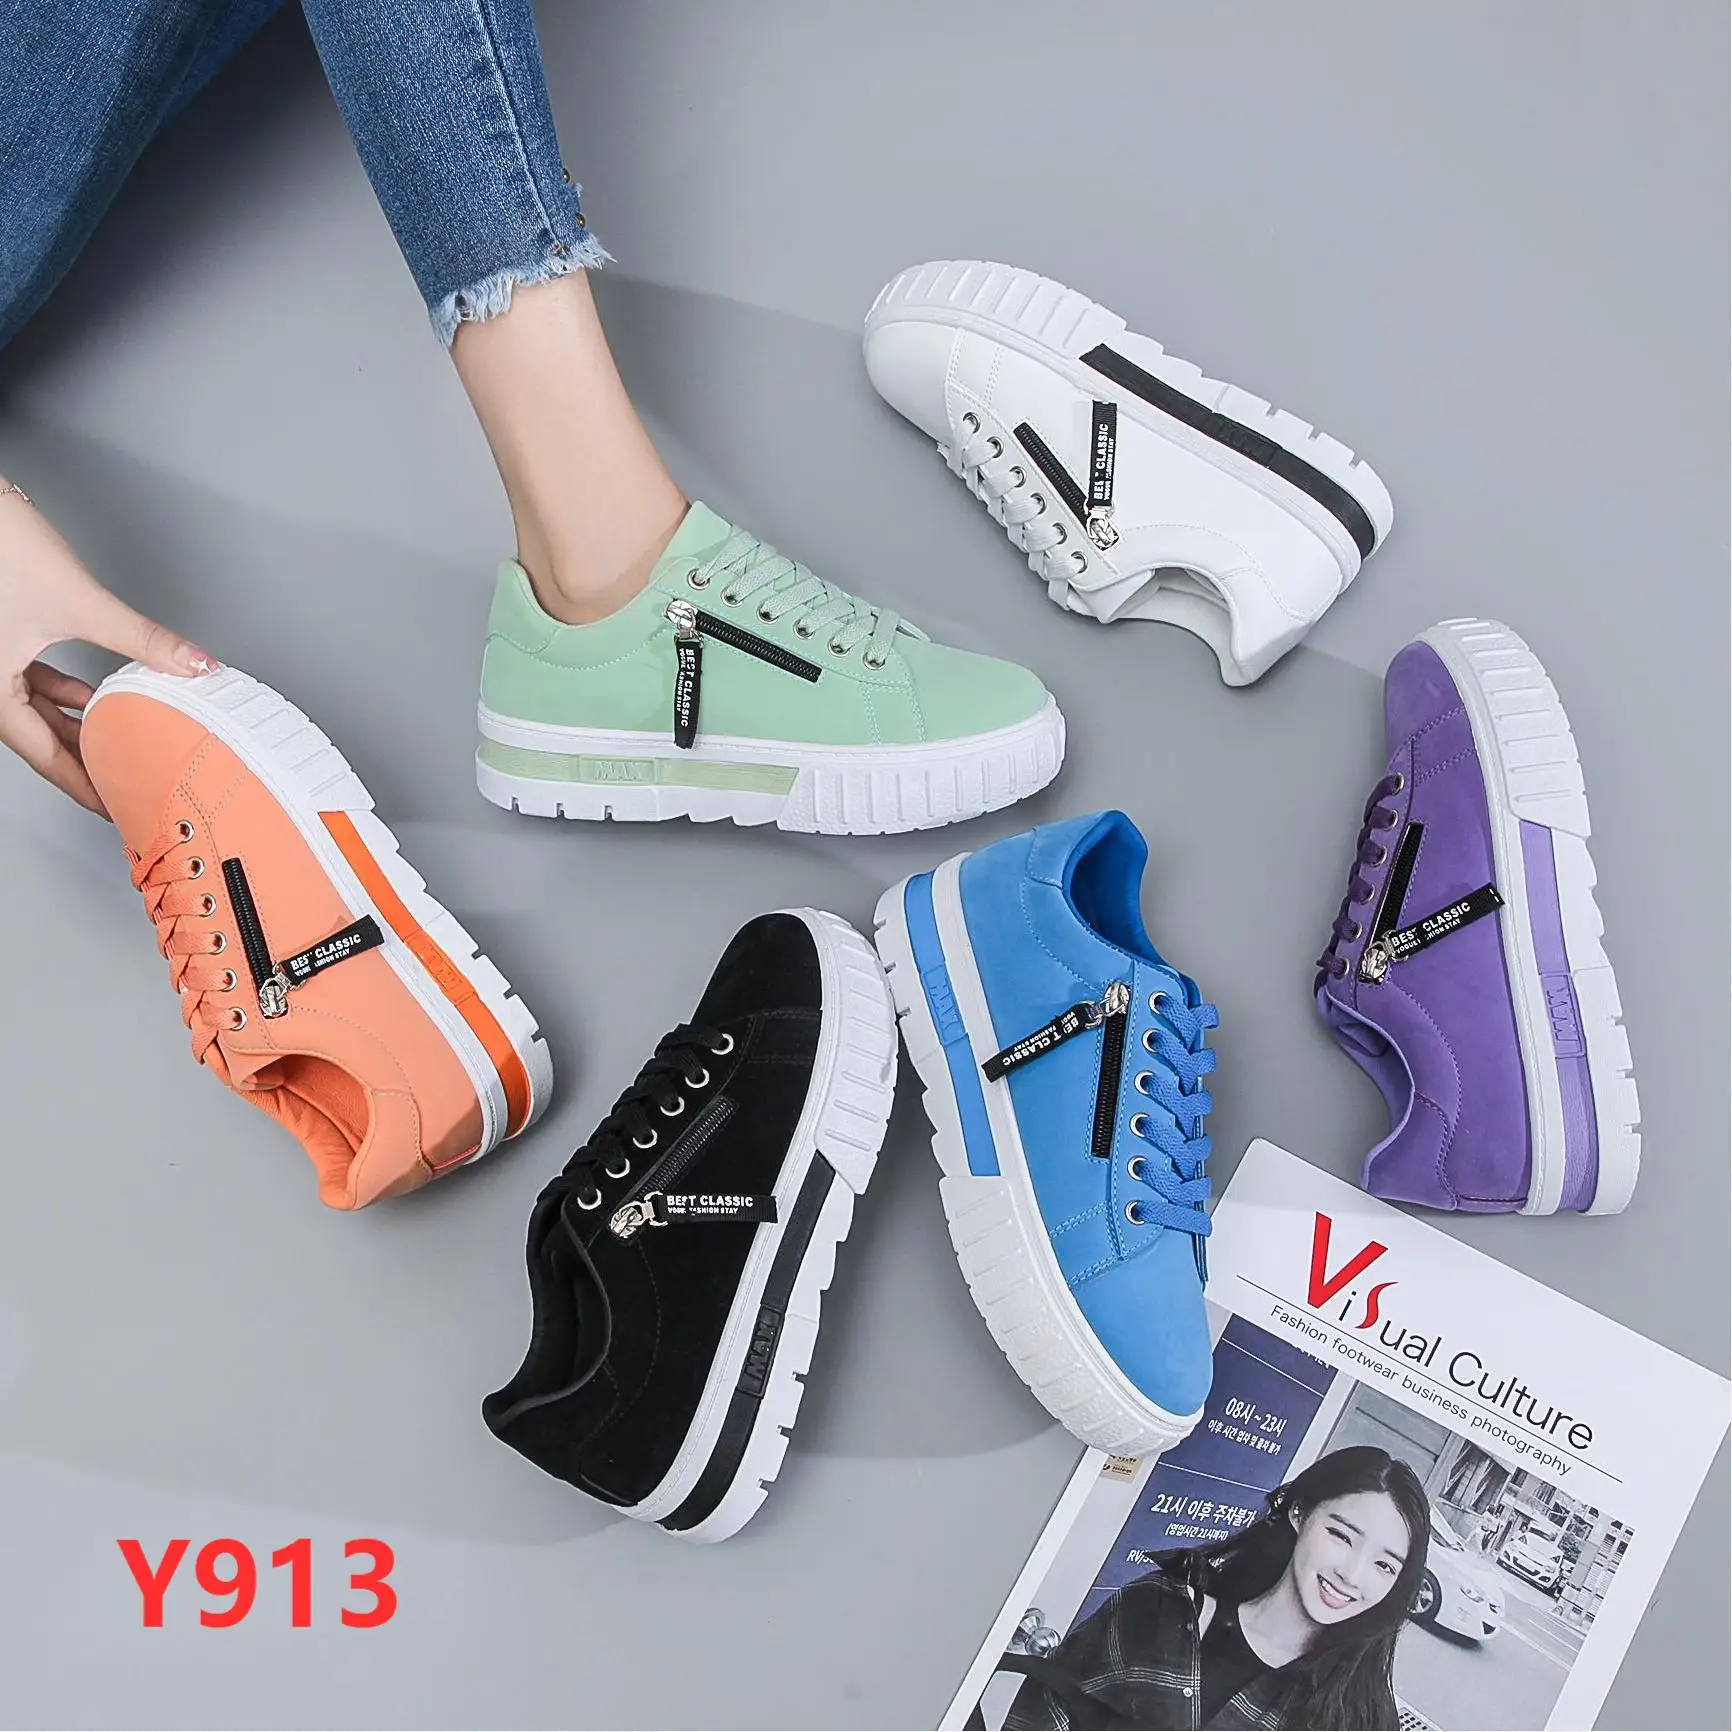 2022 suede Flat Sport Shoes White Running Sneakers New Arrivals Girls Fashion lace up zipper Casual shoes